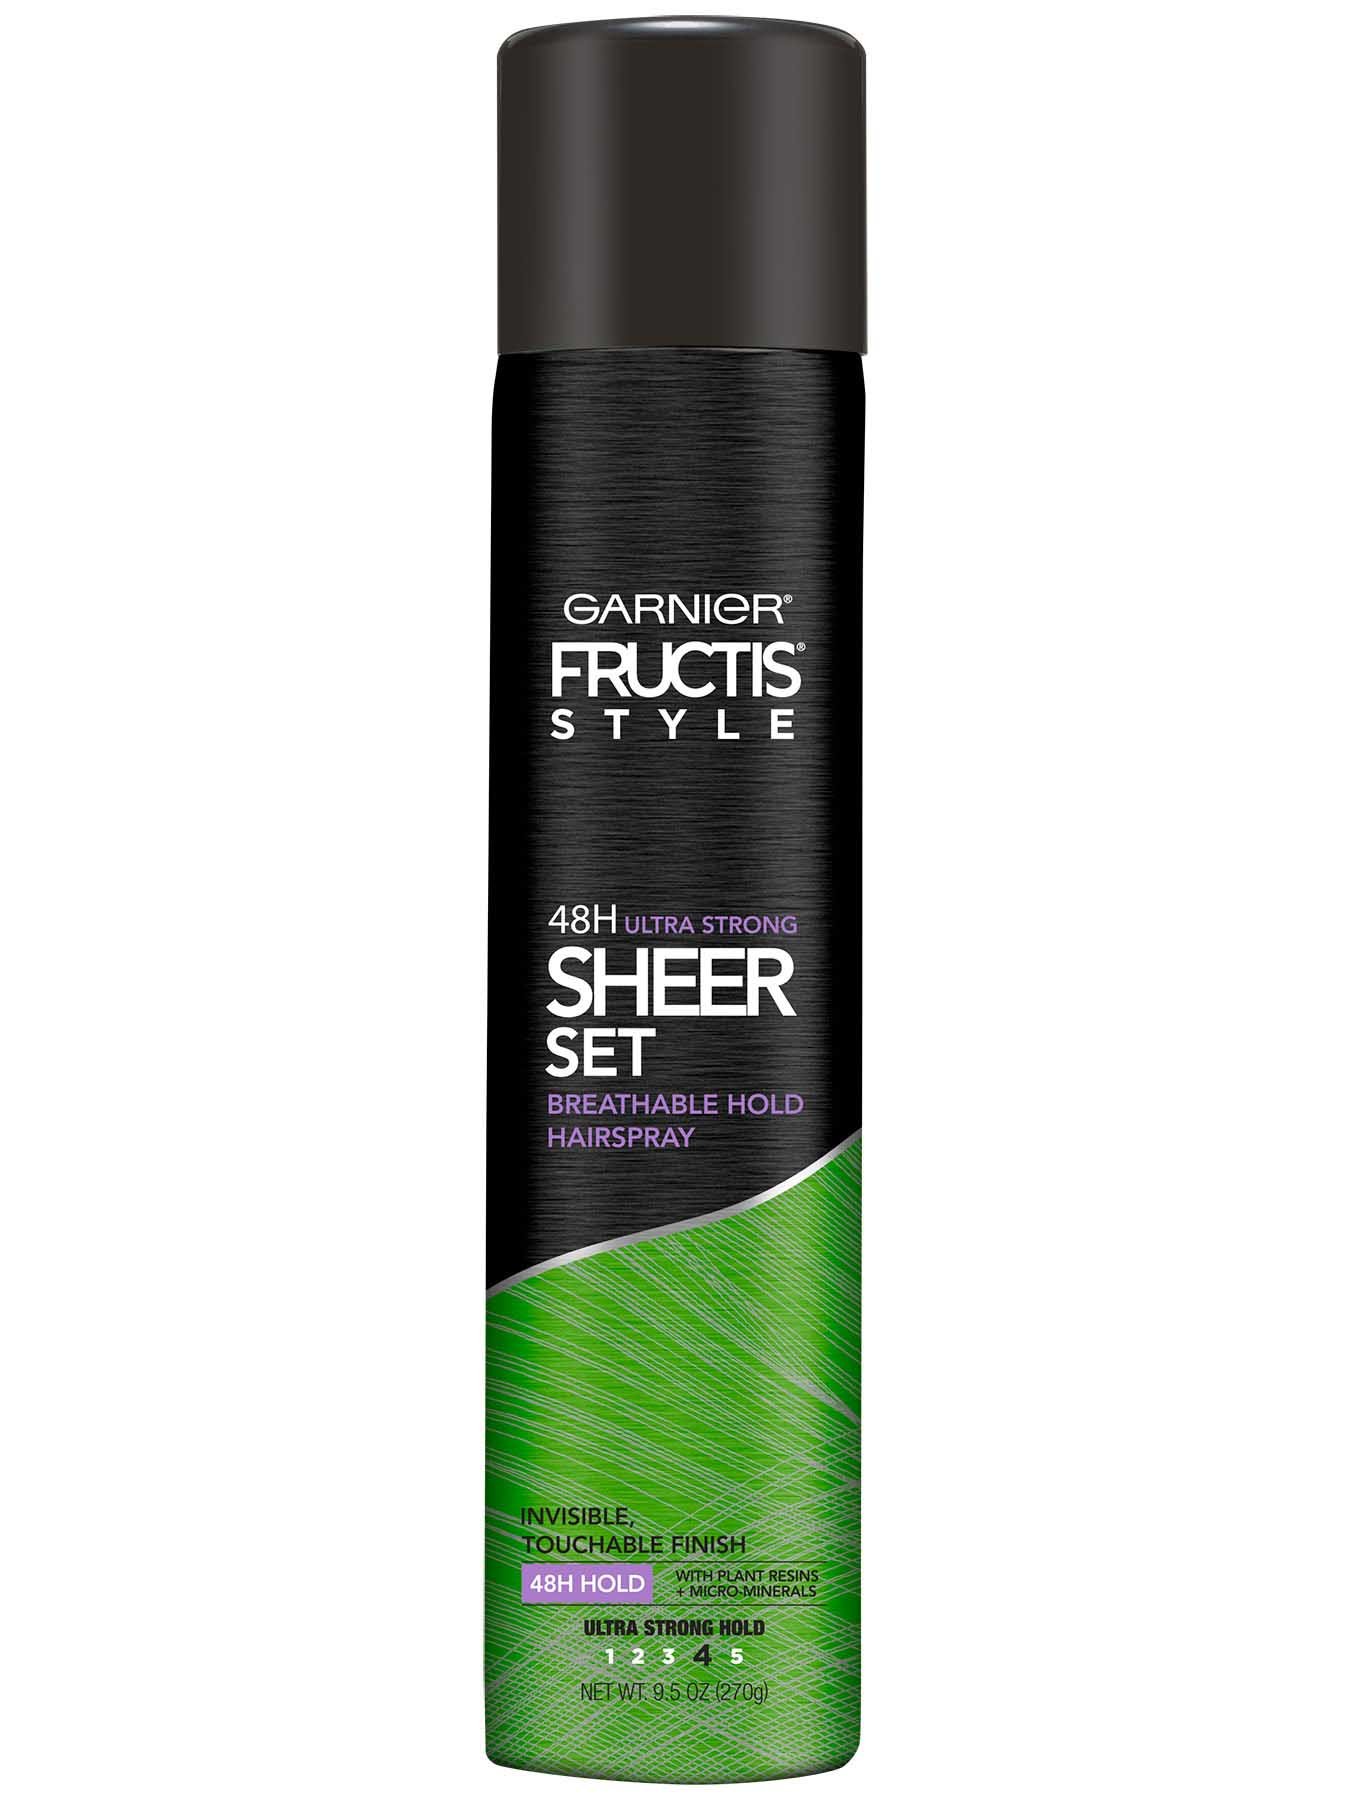 Front view of Sheer Set Ultra Strong Hold Breathable Hairspray.